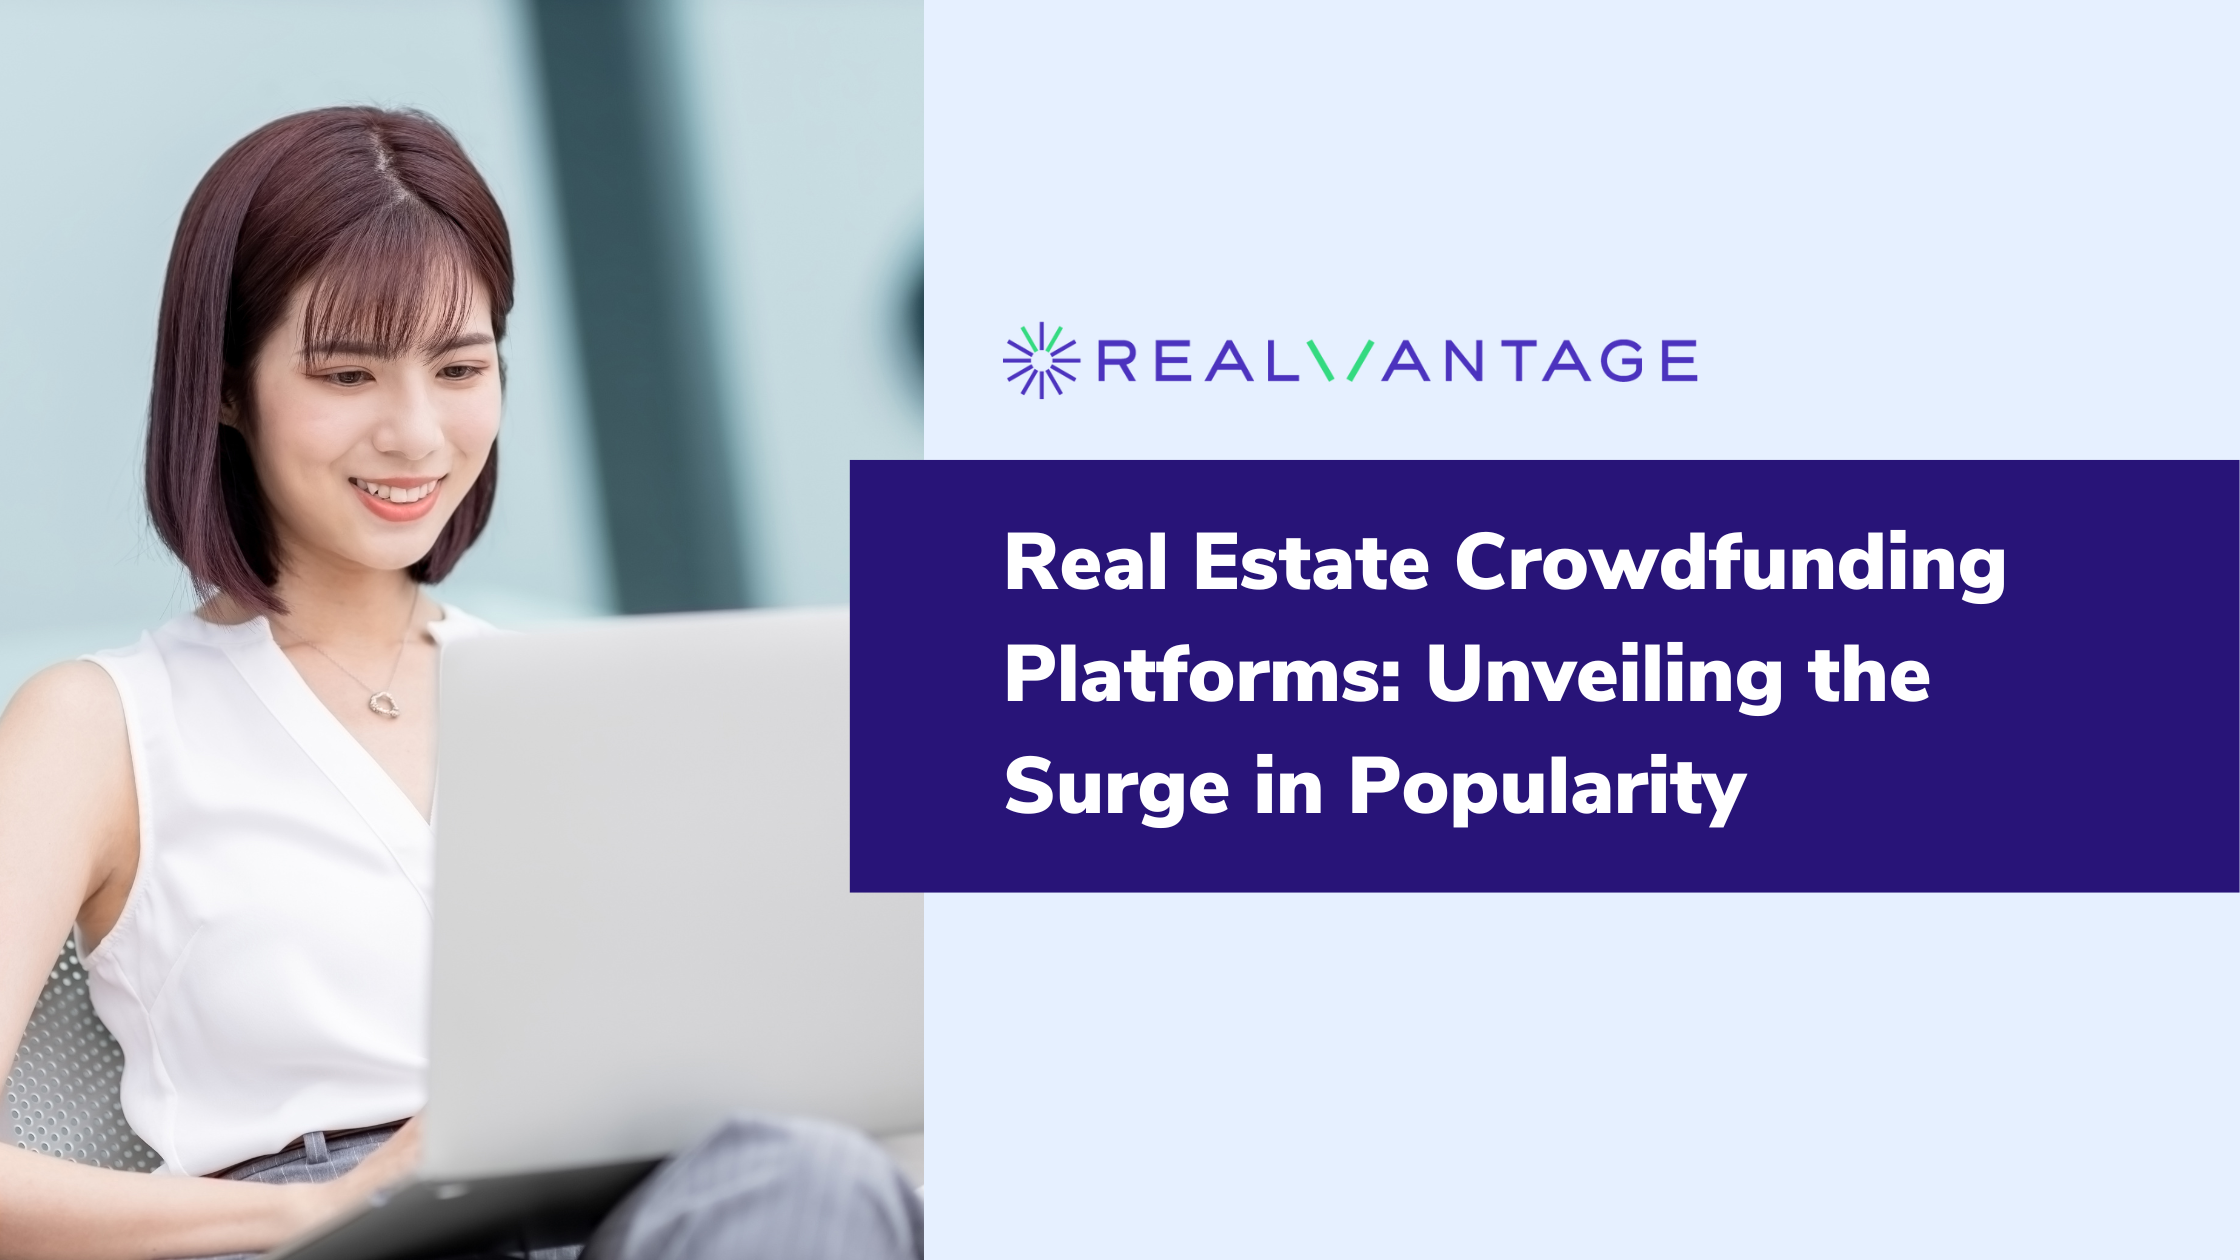 Real Estate Crowdfunding Platforms: Unveiling the Surge in Popularity